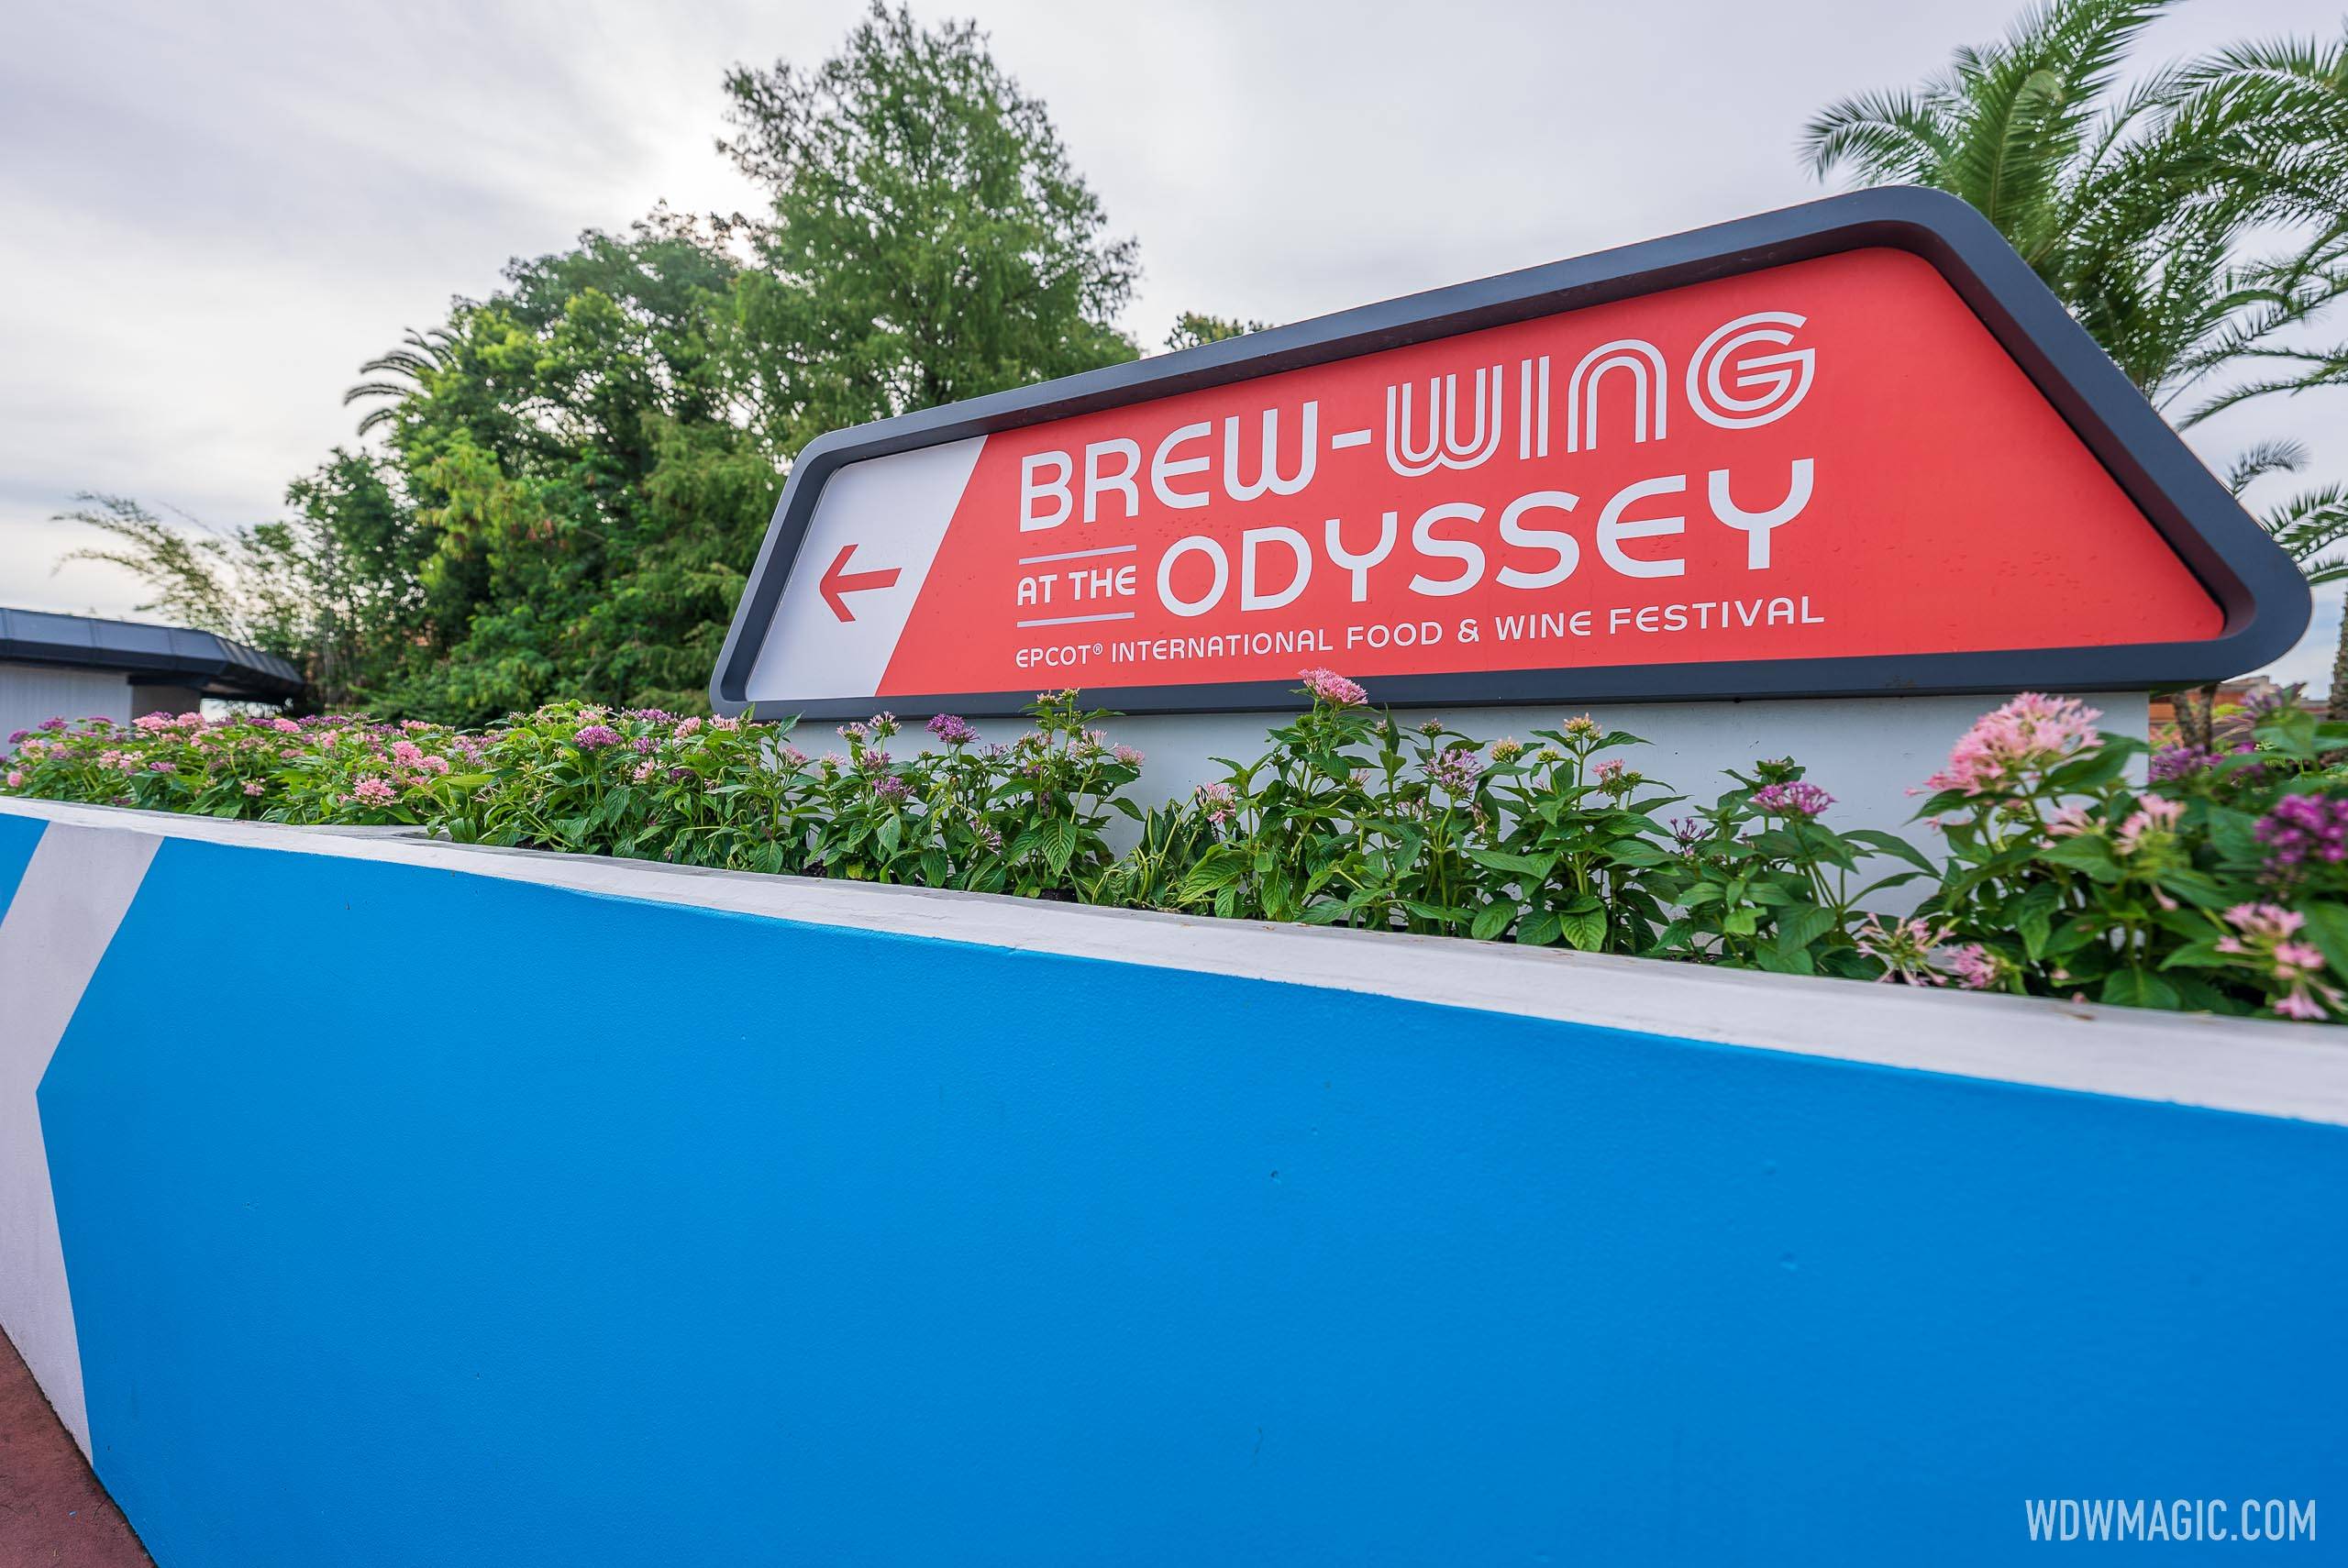 BREW-WING at the Odyssey - EPCOT International Food and Wine Festival